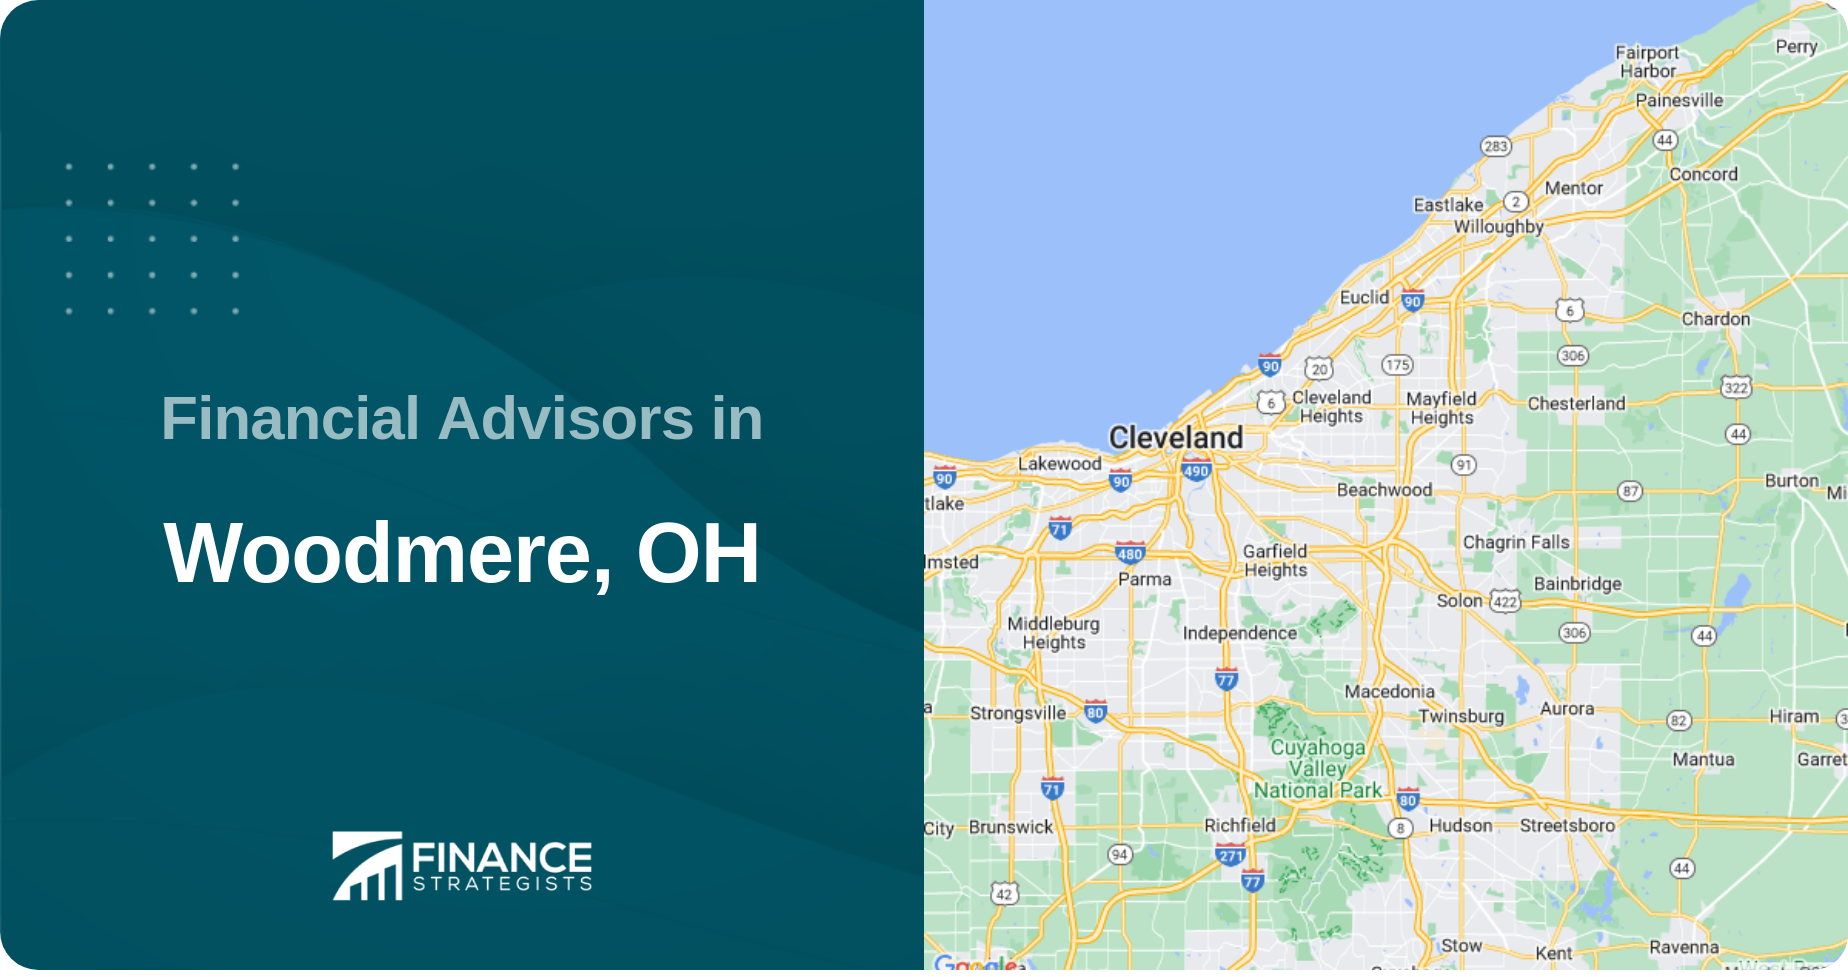 Financial Advisors in Woodmere, OH